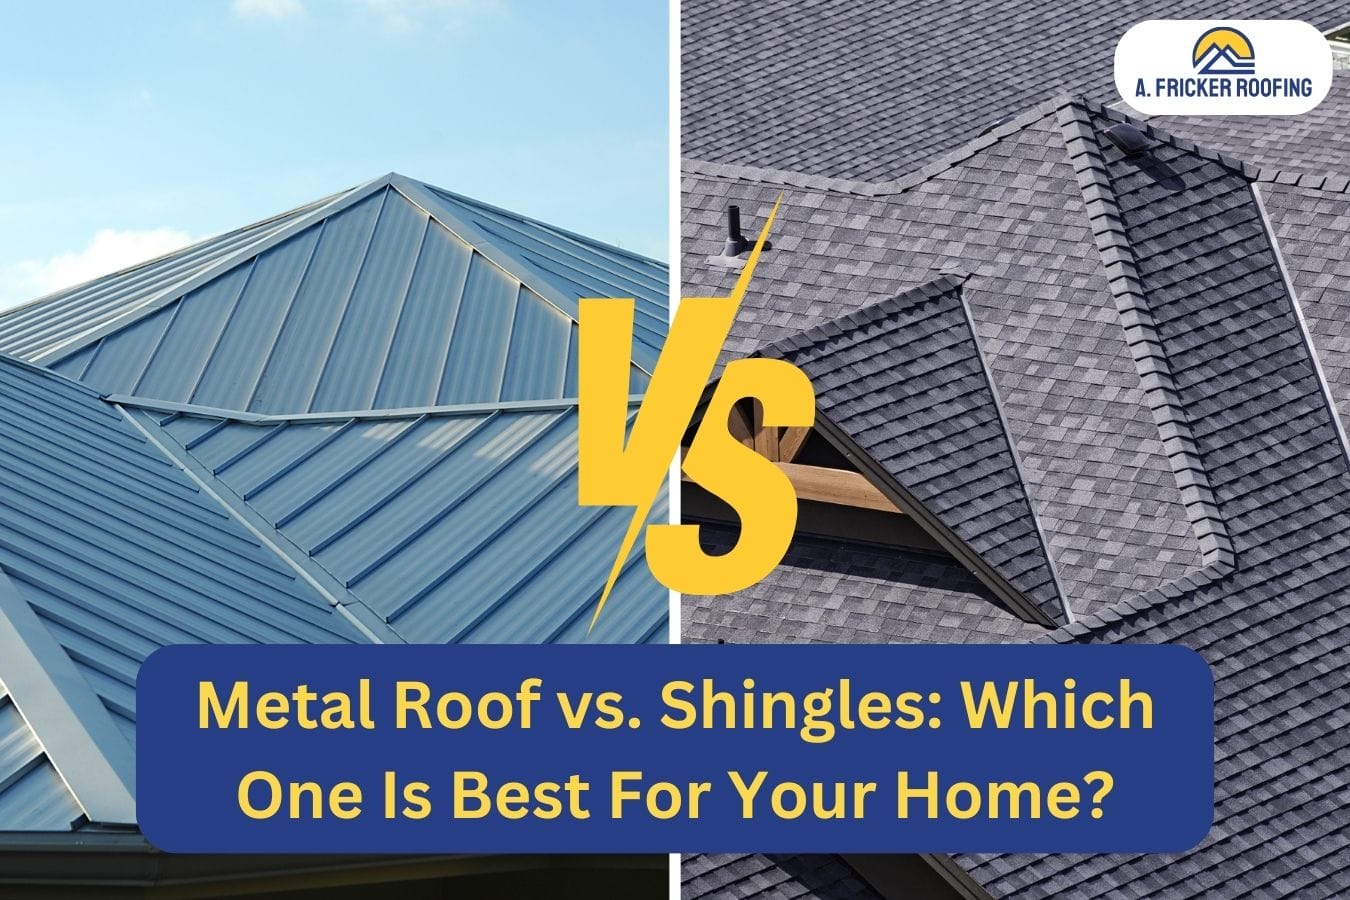 Metal Roof vs. Shingles: Which One Is Best For Your Home?